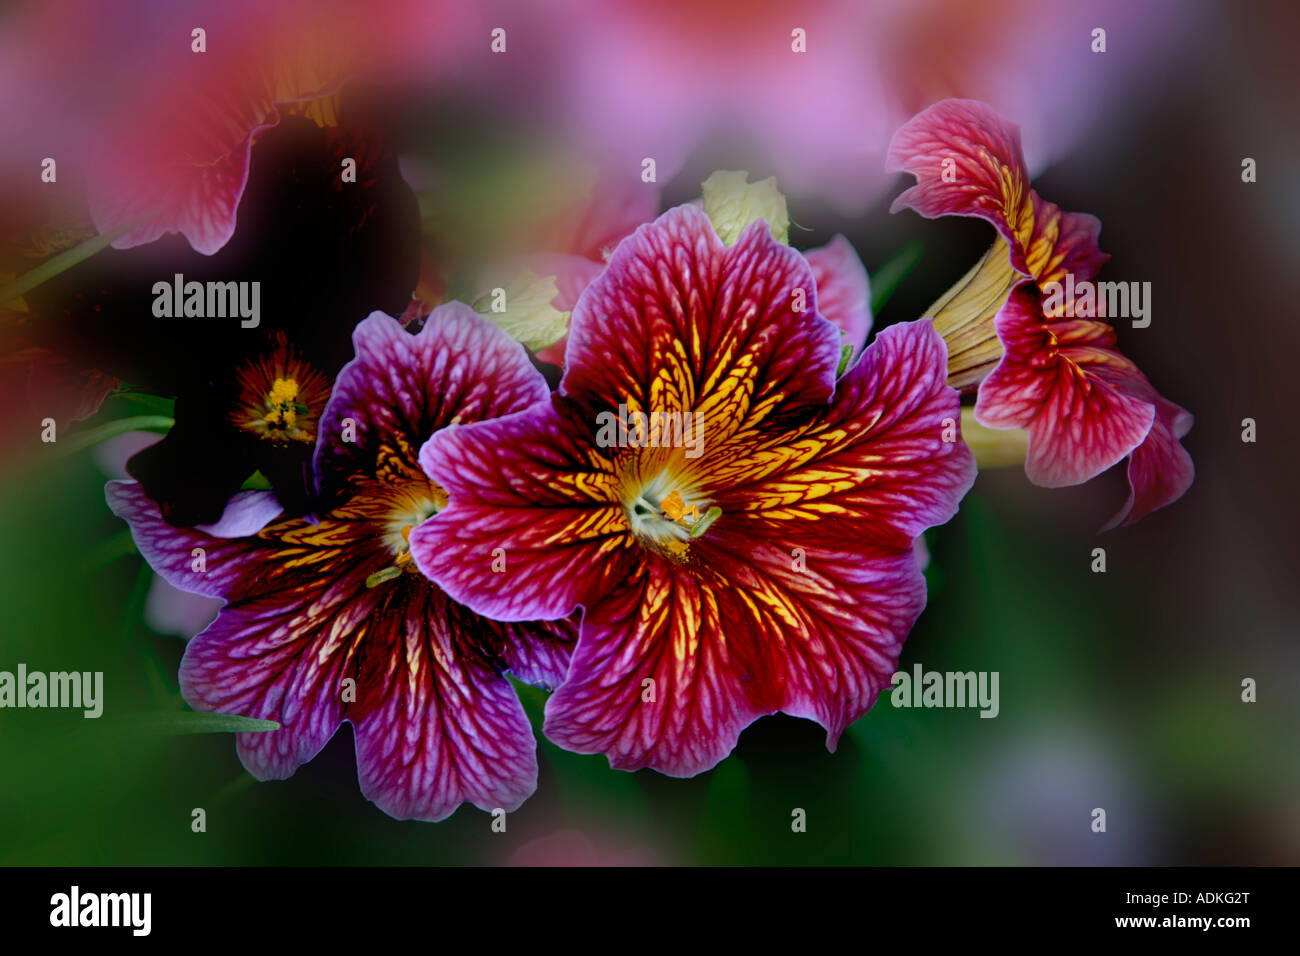 Pink with yellow patches flowers of 'Salpiglossis' on the blurred background Stock Photo